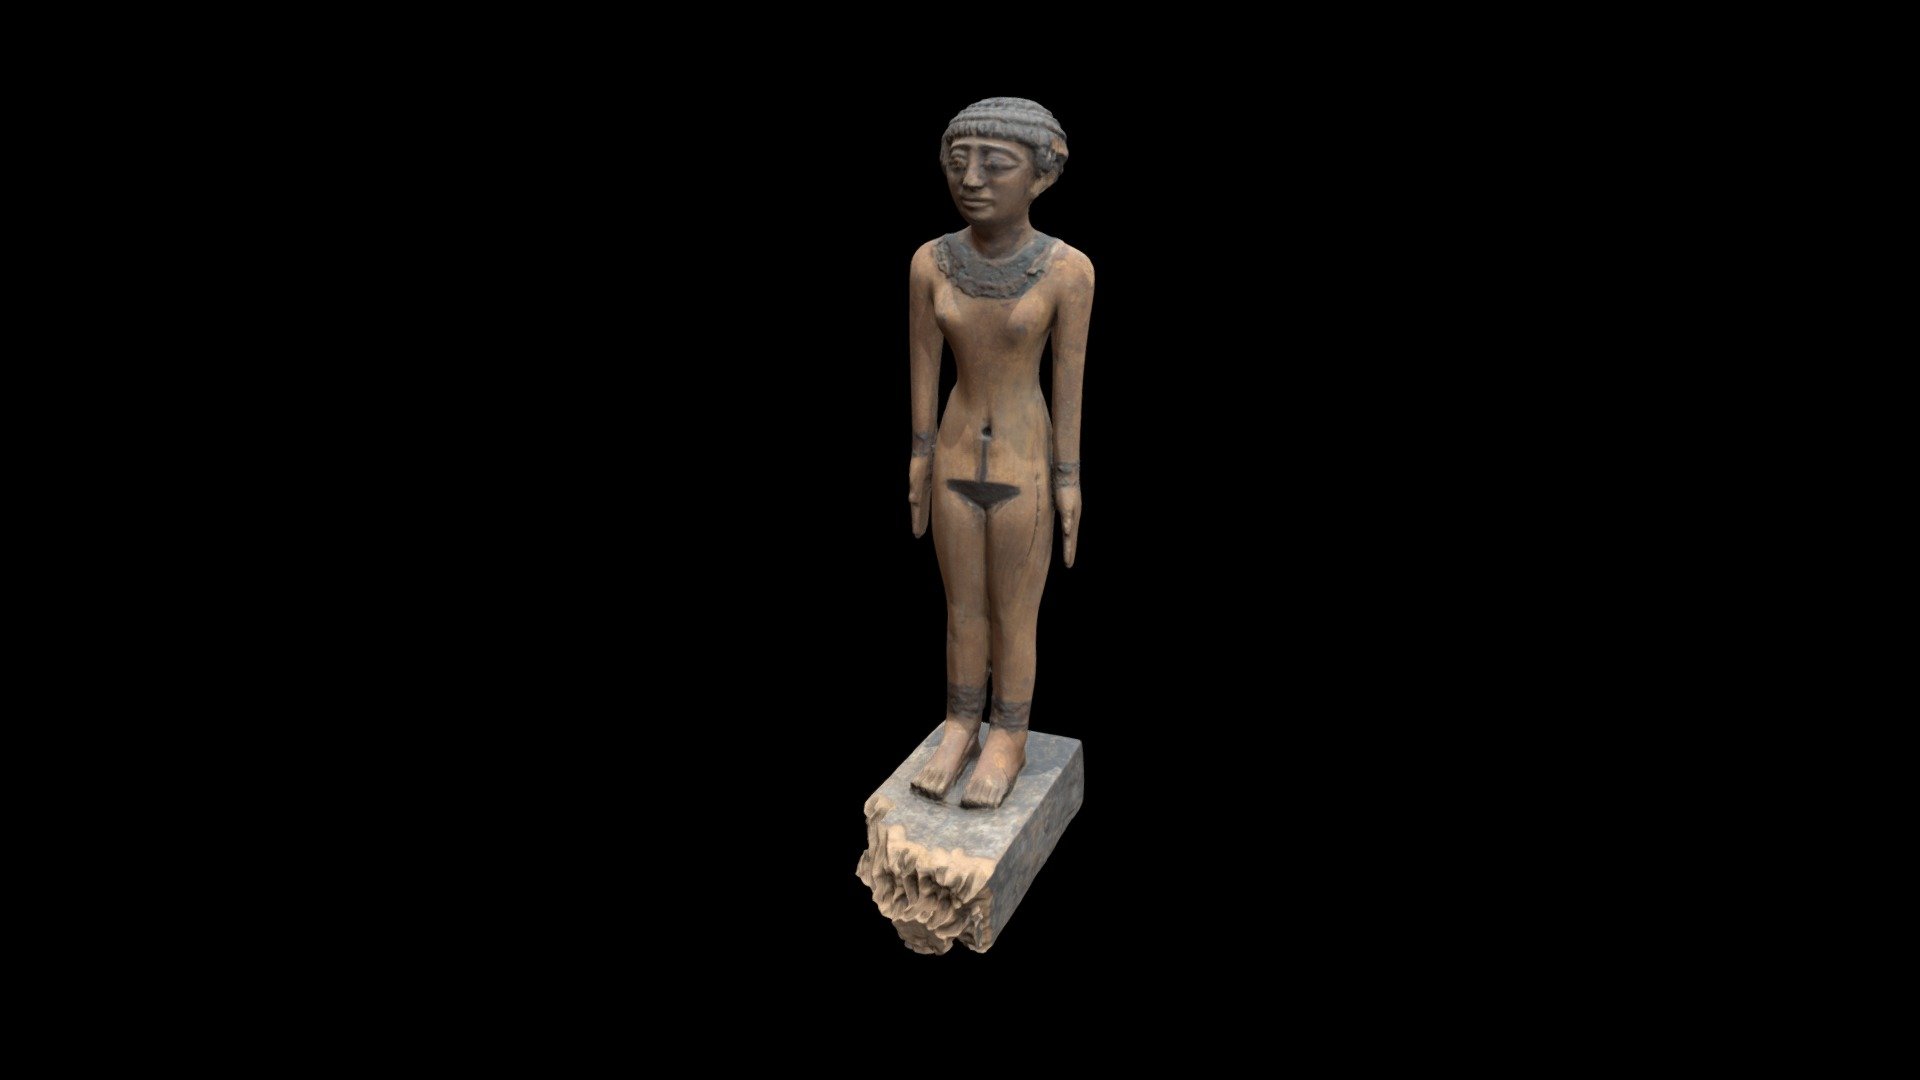 You can copy, modify, and distribute this work, even for commercial purposes, all without asking permission. Learn more about The Cleveland Museum of Art’s Open Access initiative: http://www.clevelandart.org/open-access-faqs

Female Statuette, c. 2040–1859 BC. Egypt, Middle Kingdom, late Dynasty 11 to Early Dynasty 12. Painted wood; with base: 28.4 x 6.8 x 12.2 cm (11 3/16 x 2 11/16 x 4 13/16 in.). The Cleveland Museum of Art, Gift of the John Huntington Art and Polytechnic Trust 1914.603

Learn more on The Cleveland Museum of Art’s Collection Online: https://www.clevelandart.org/art/1914.603 - 1914.603 Female Statuette - 3D model by Cleveland Museum of Art (@clevelandart) 3d model